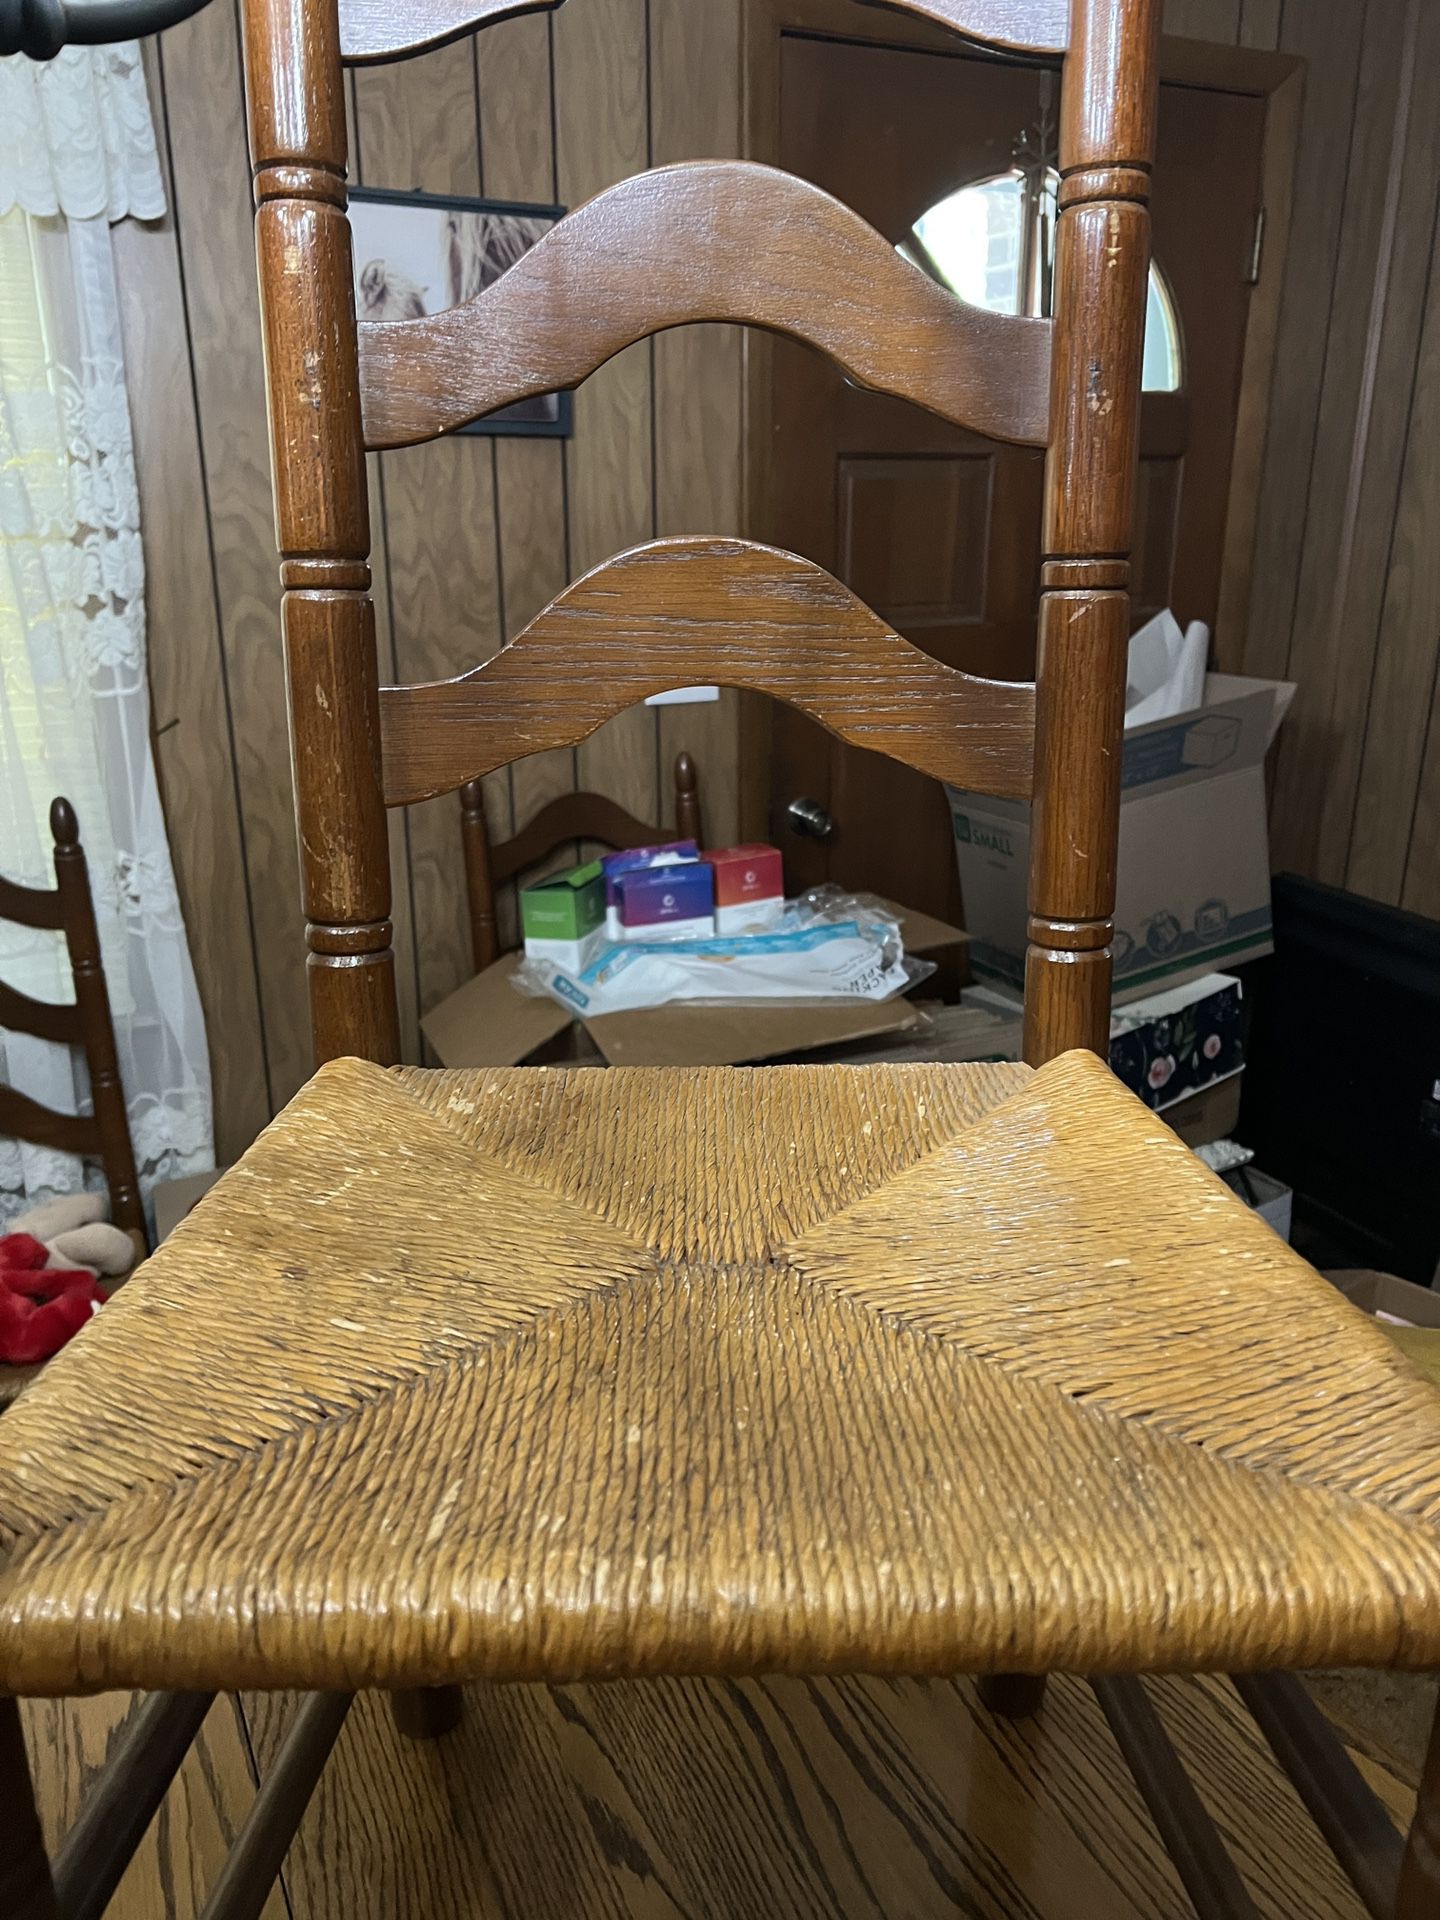 Dining Room Table, 6 Chairs And China Cabinet  